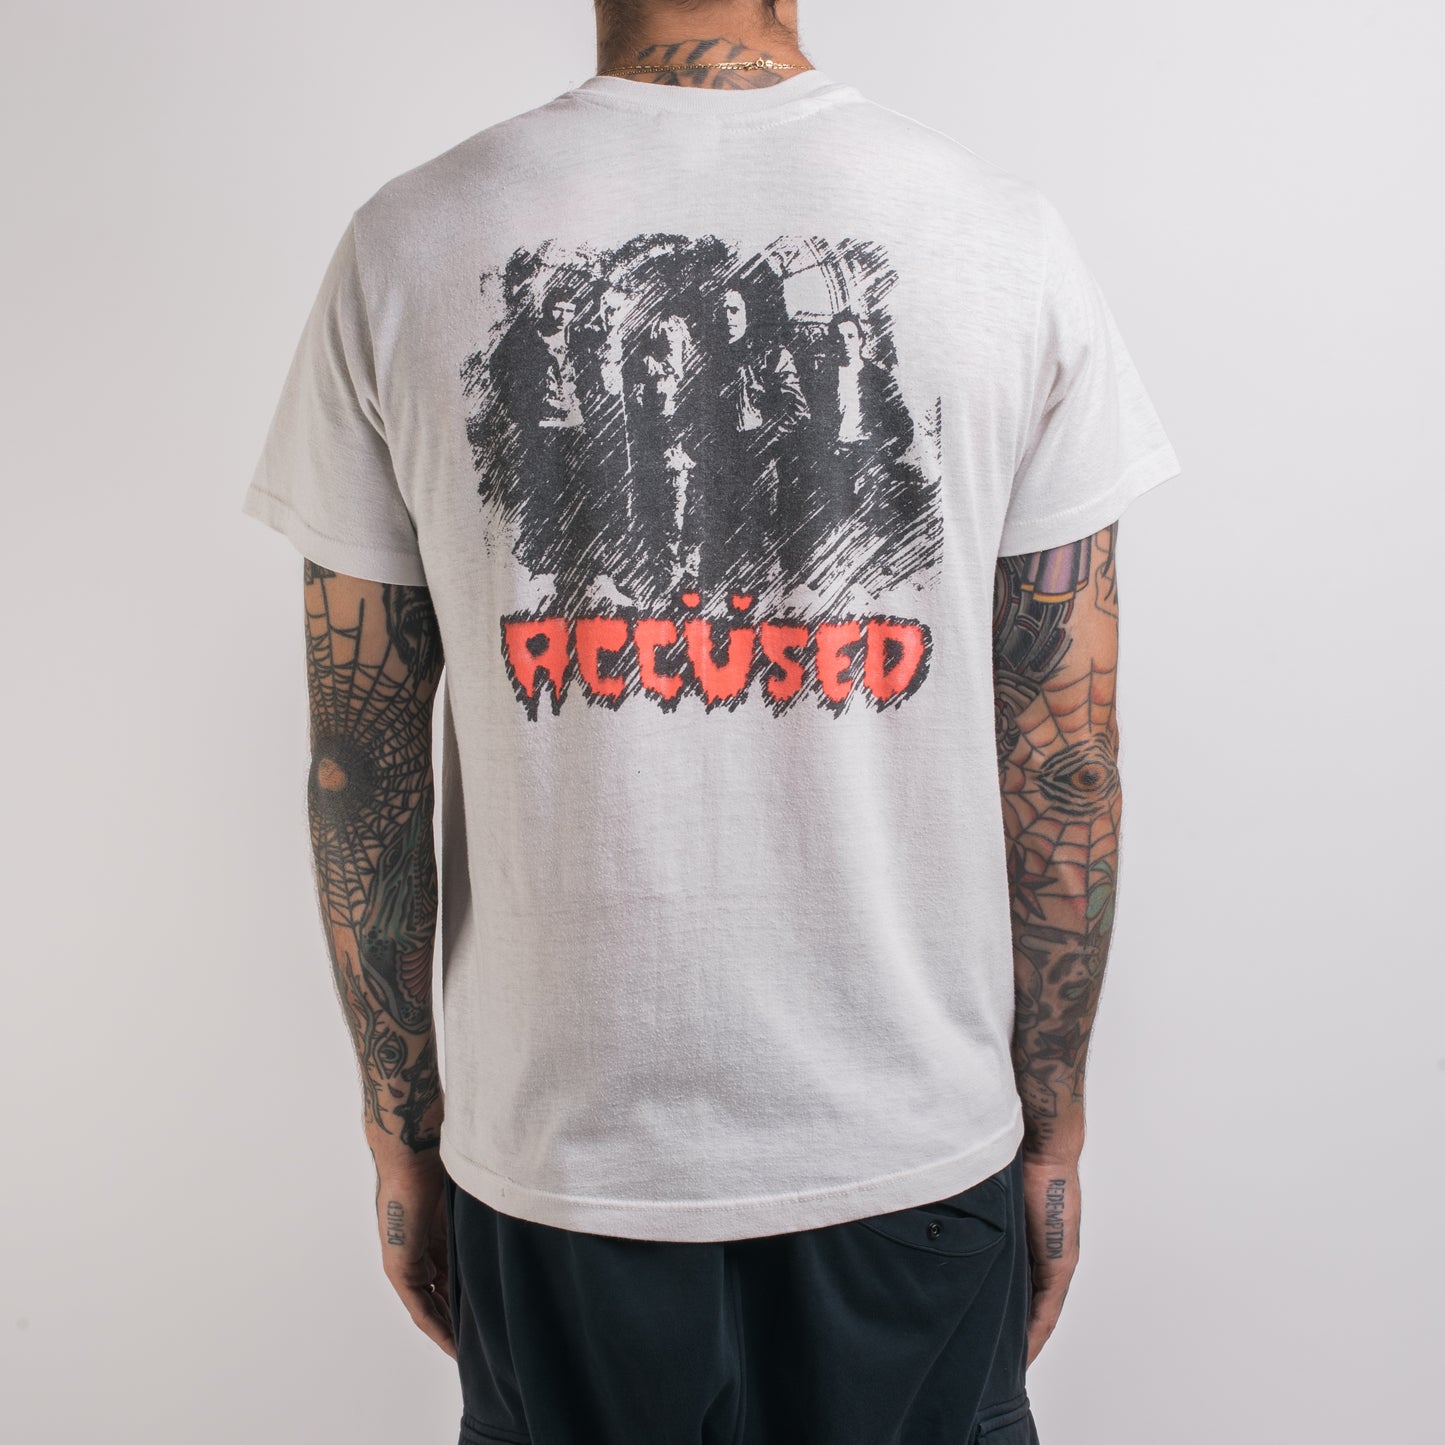 Vintage 80’s The Accused T-Shirt